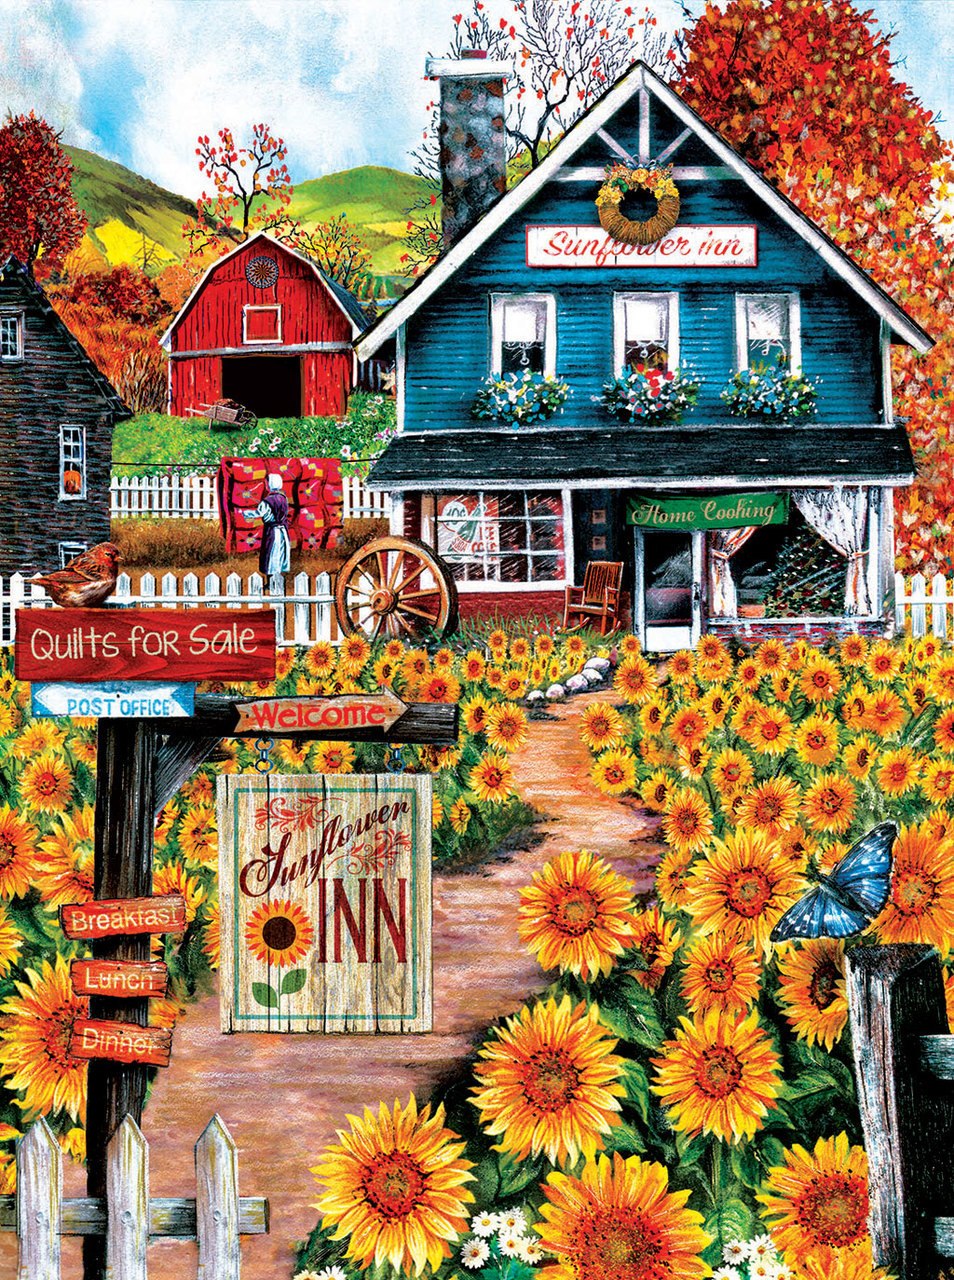 At the Sunflower Inn - 1000pc Jigsaw Puzzle by Sunsout